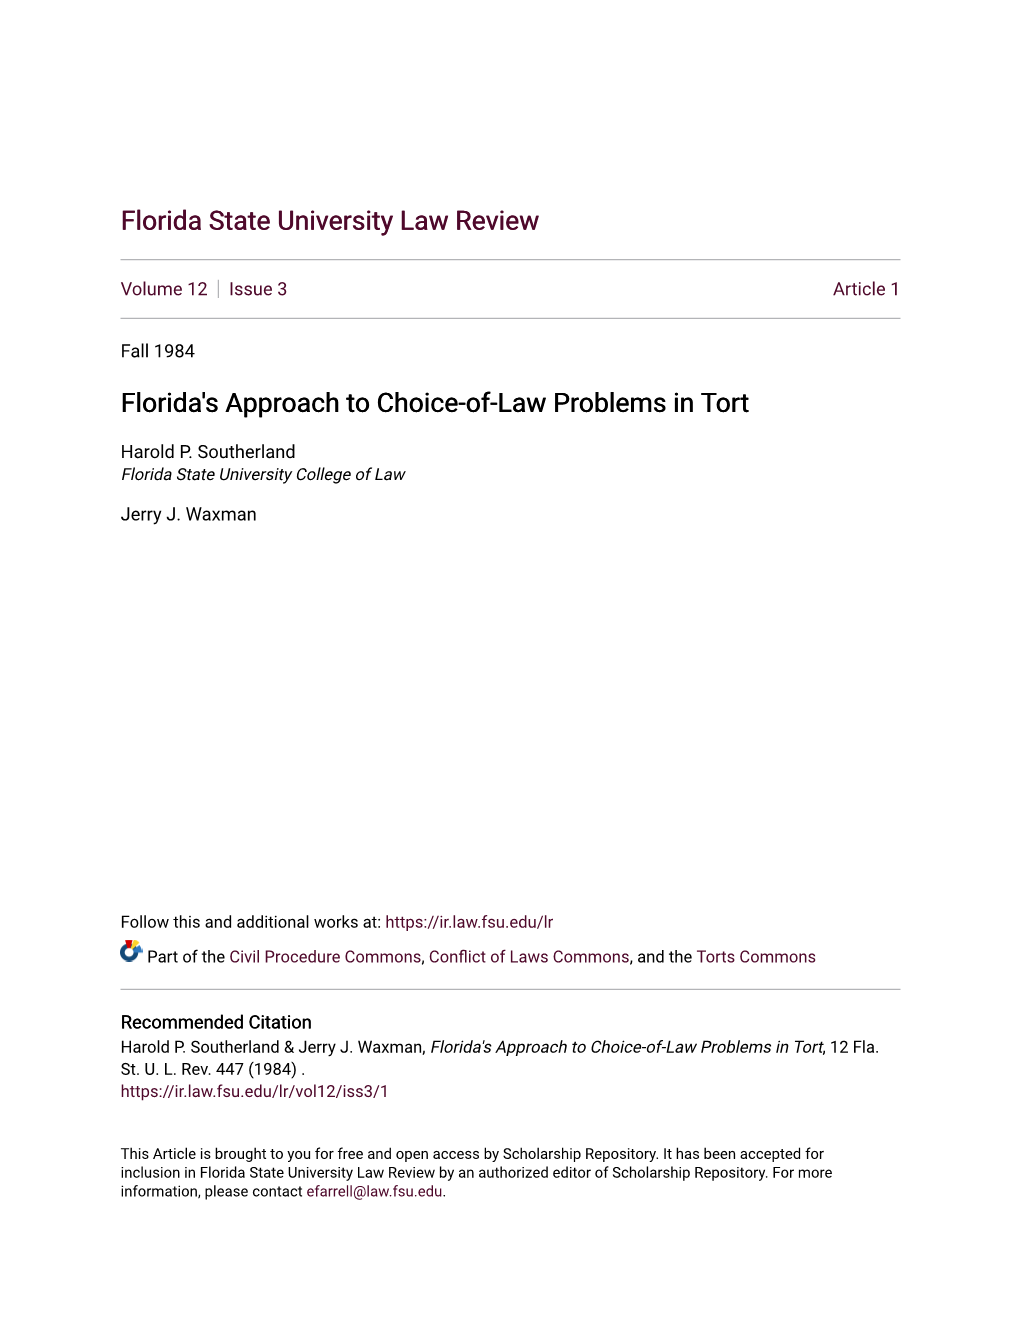 Florida's Approach to Choice-Of-Law Problems in Tort